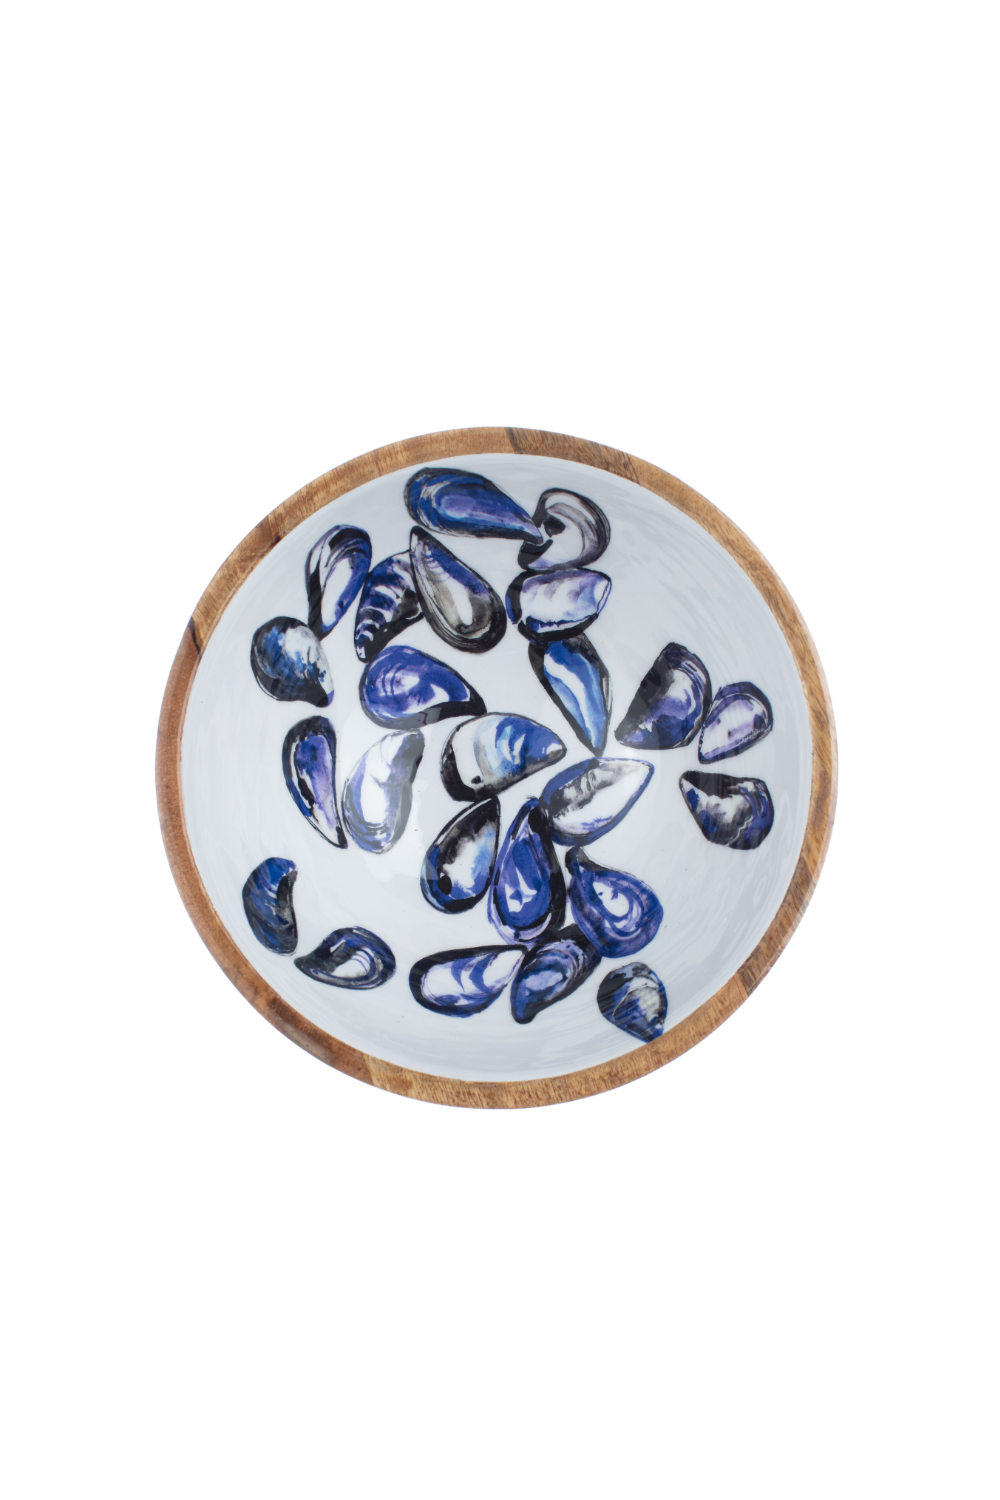 Blue and White Mussels Moules Design Wooden Large 30cm Bowl by Shoeless Joe